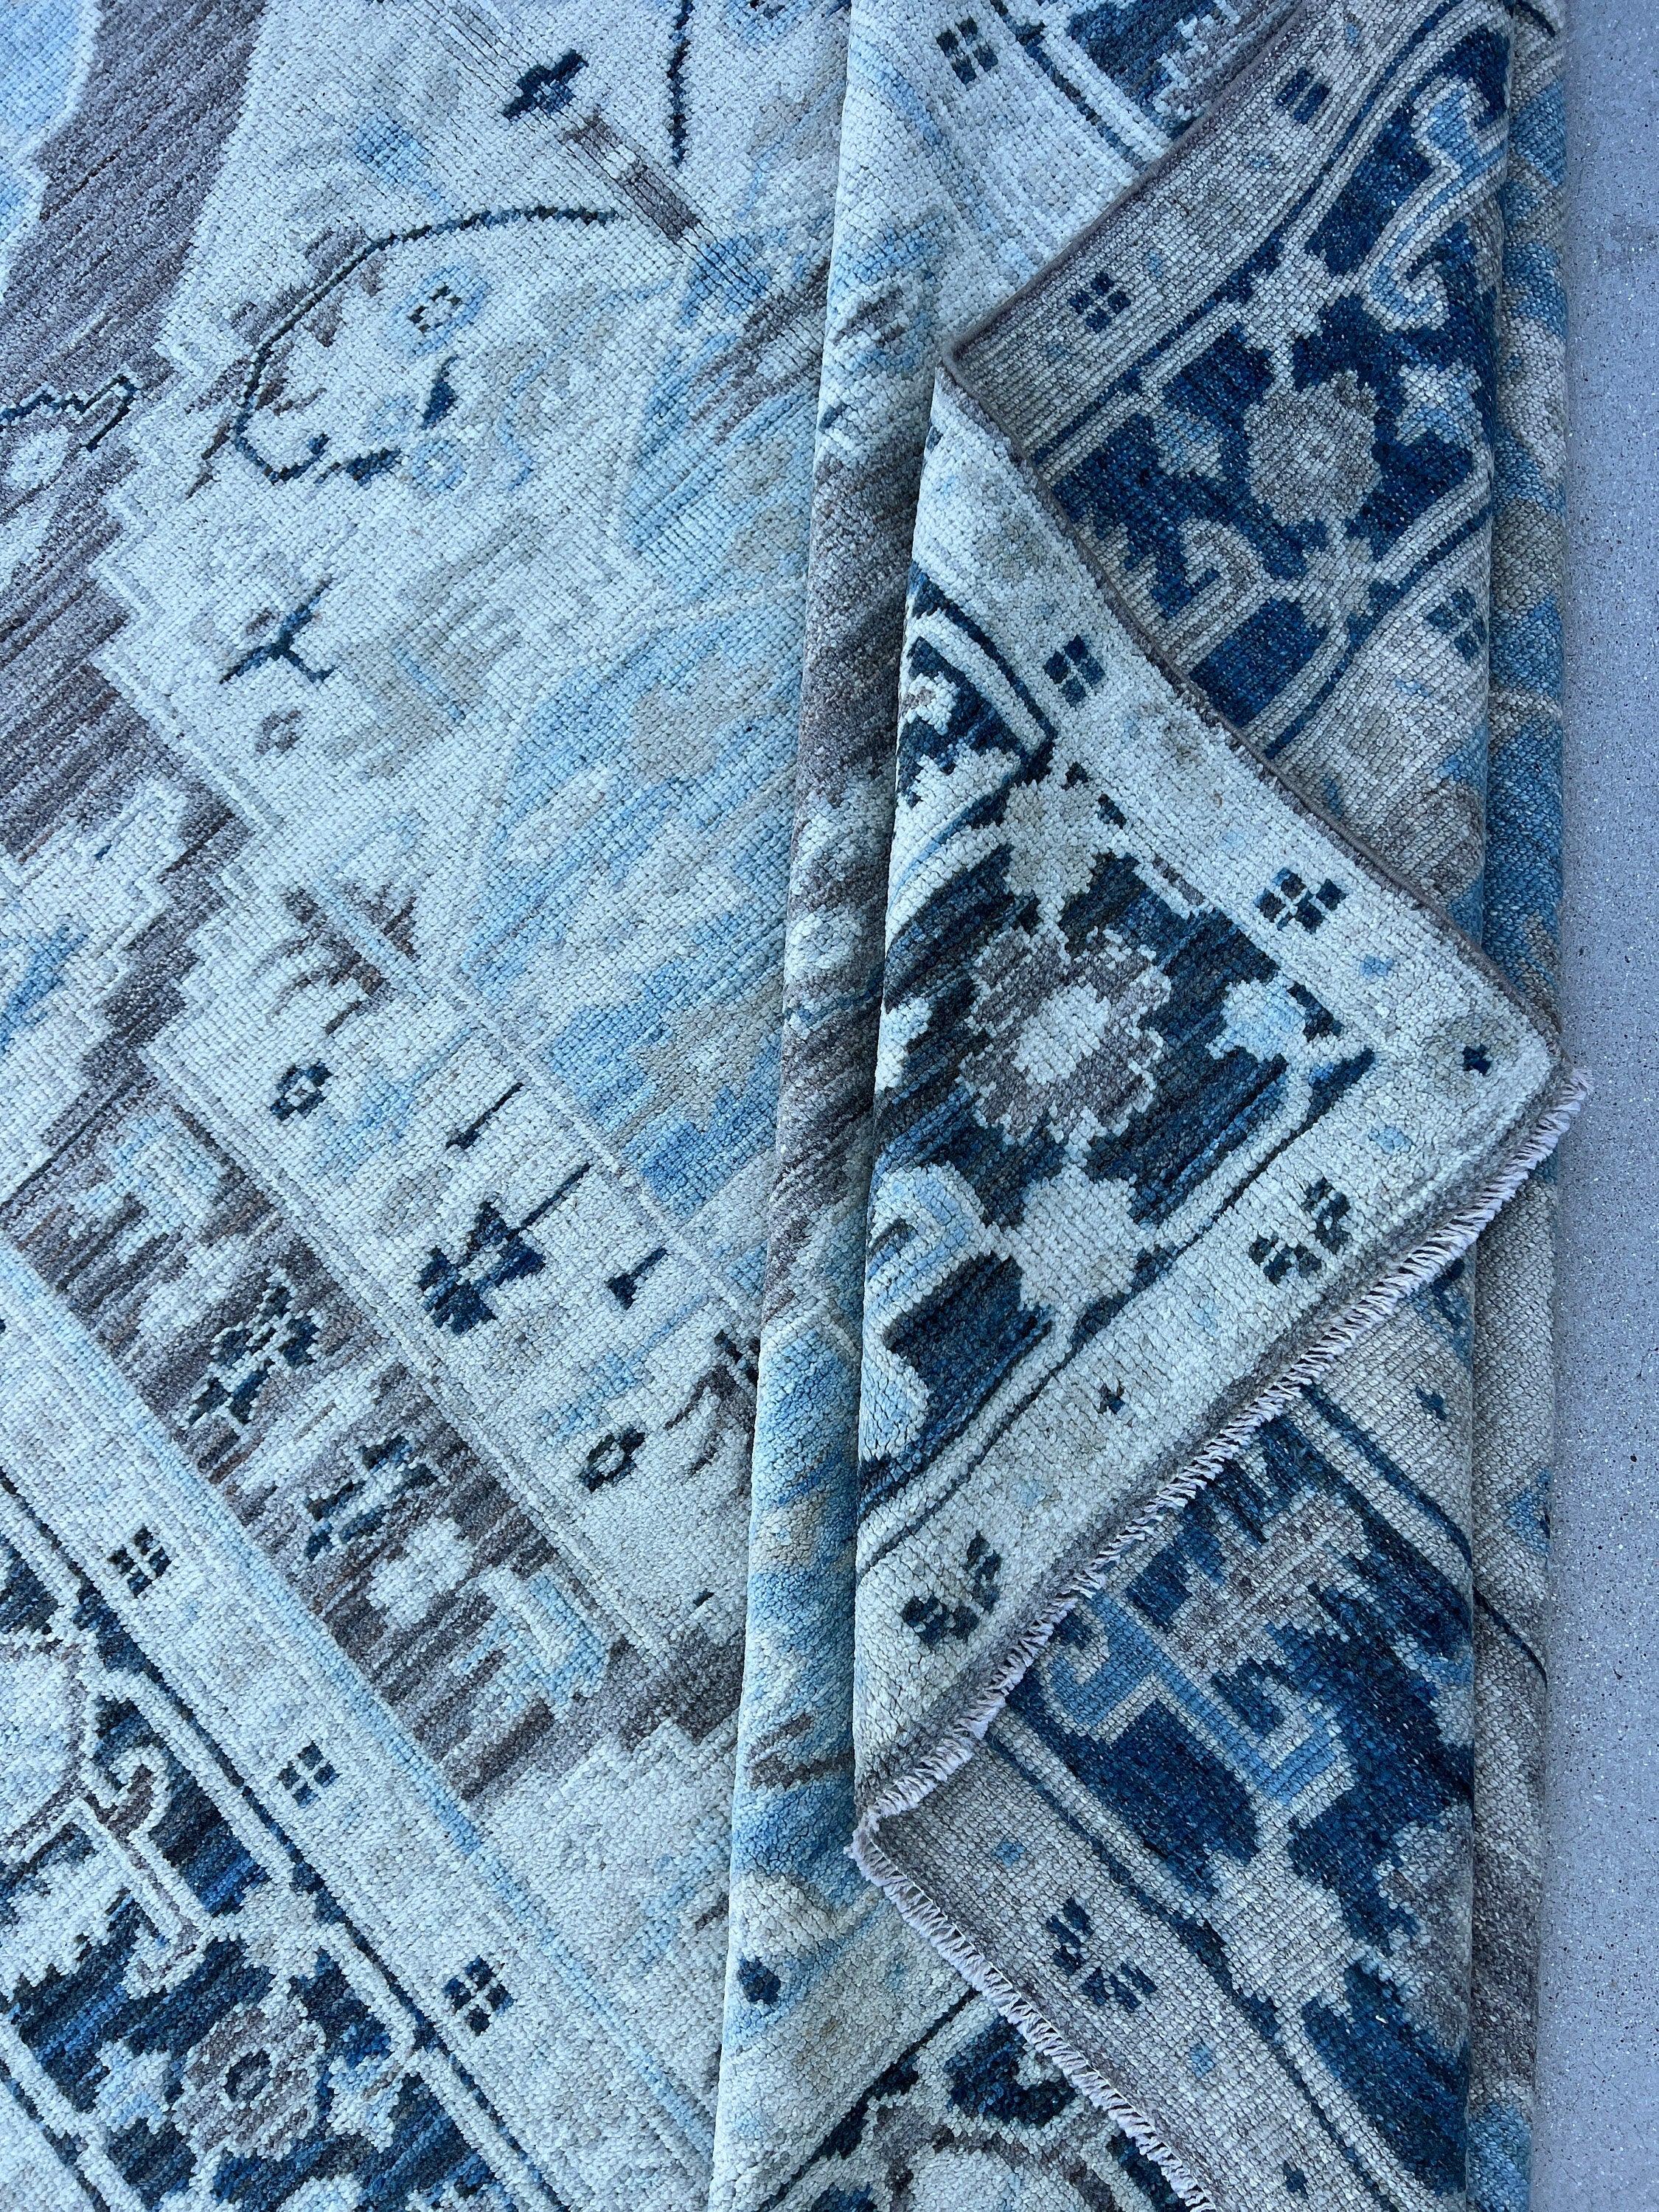 8x10 (240x300) Handmade Afghan Rug | Sky Baby Navy Midnight Blue Grey Ivory Turquoise | Floral Geometric Persian Turkish Hand Knotted Wool